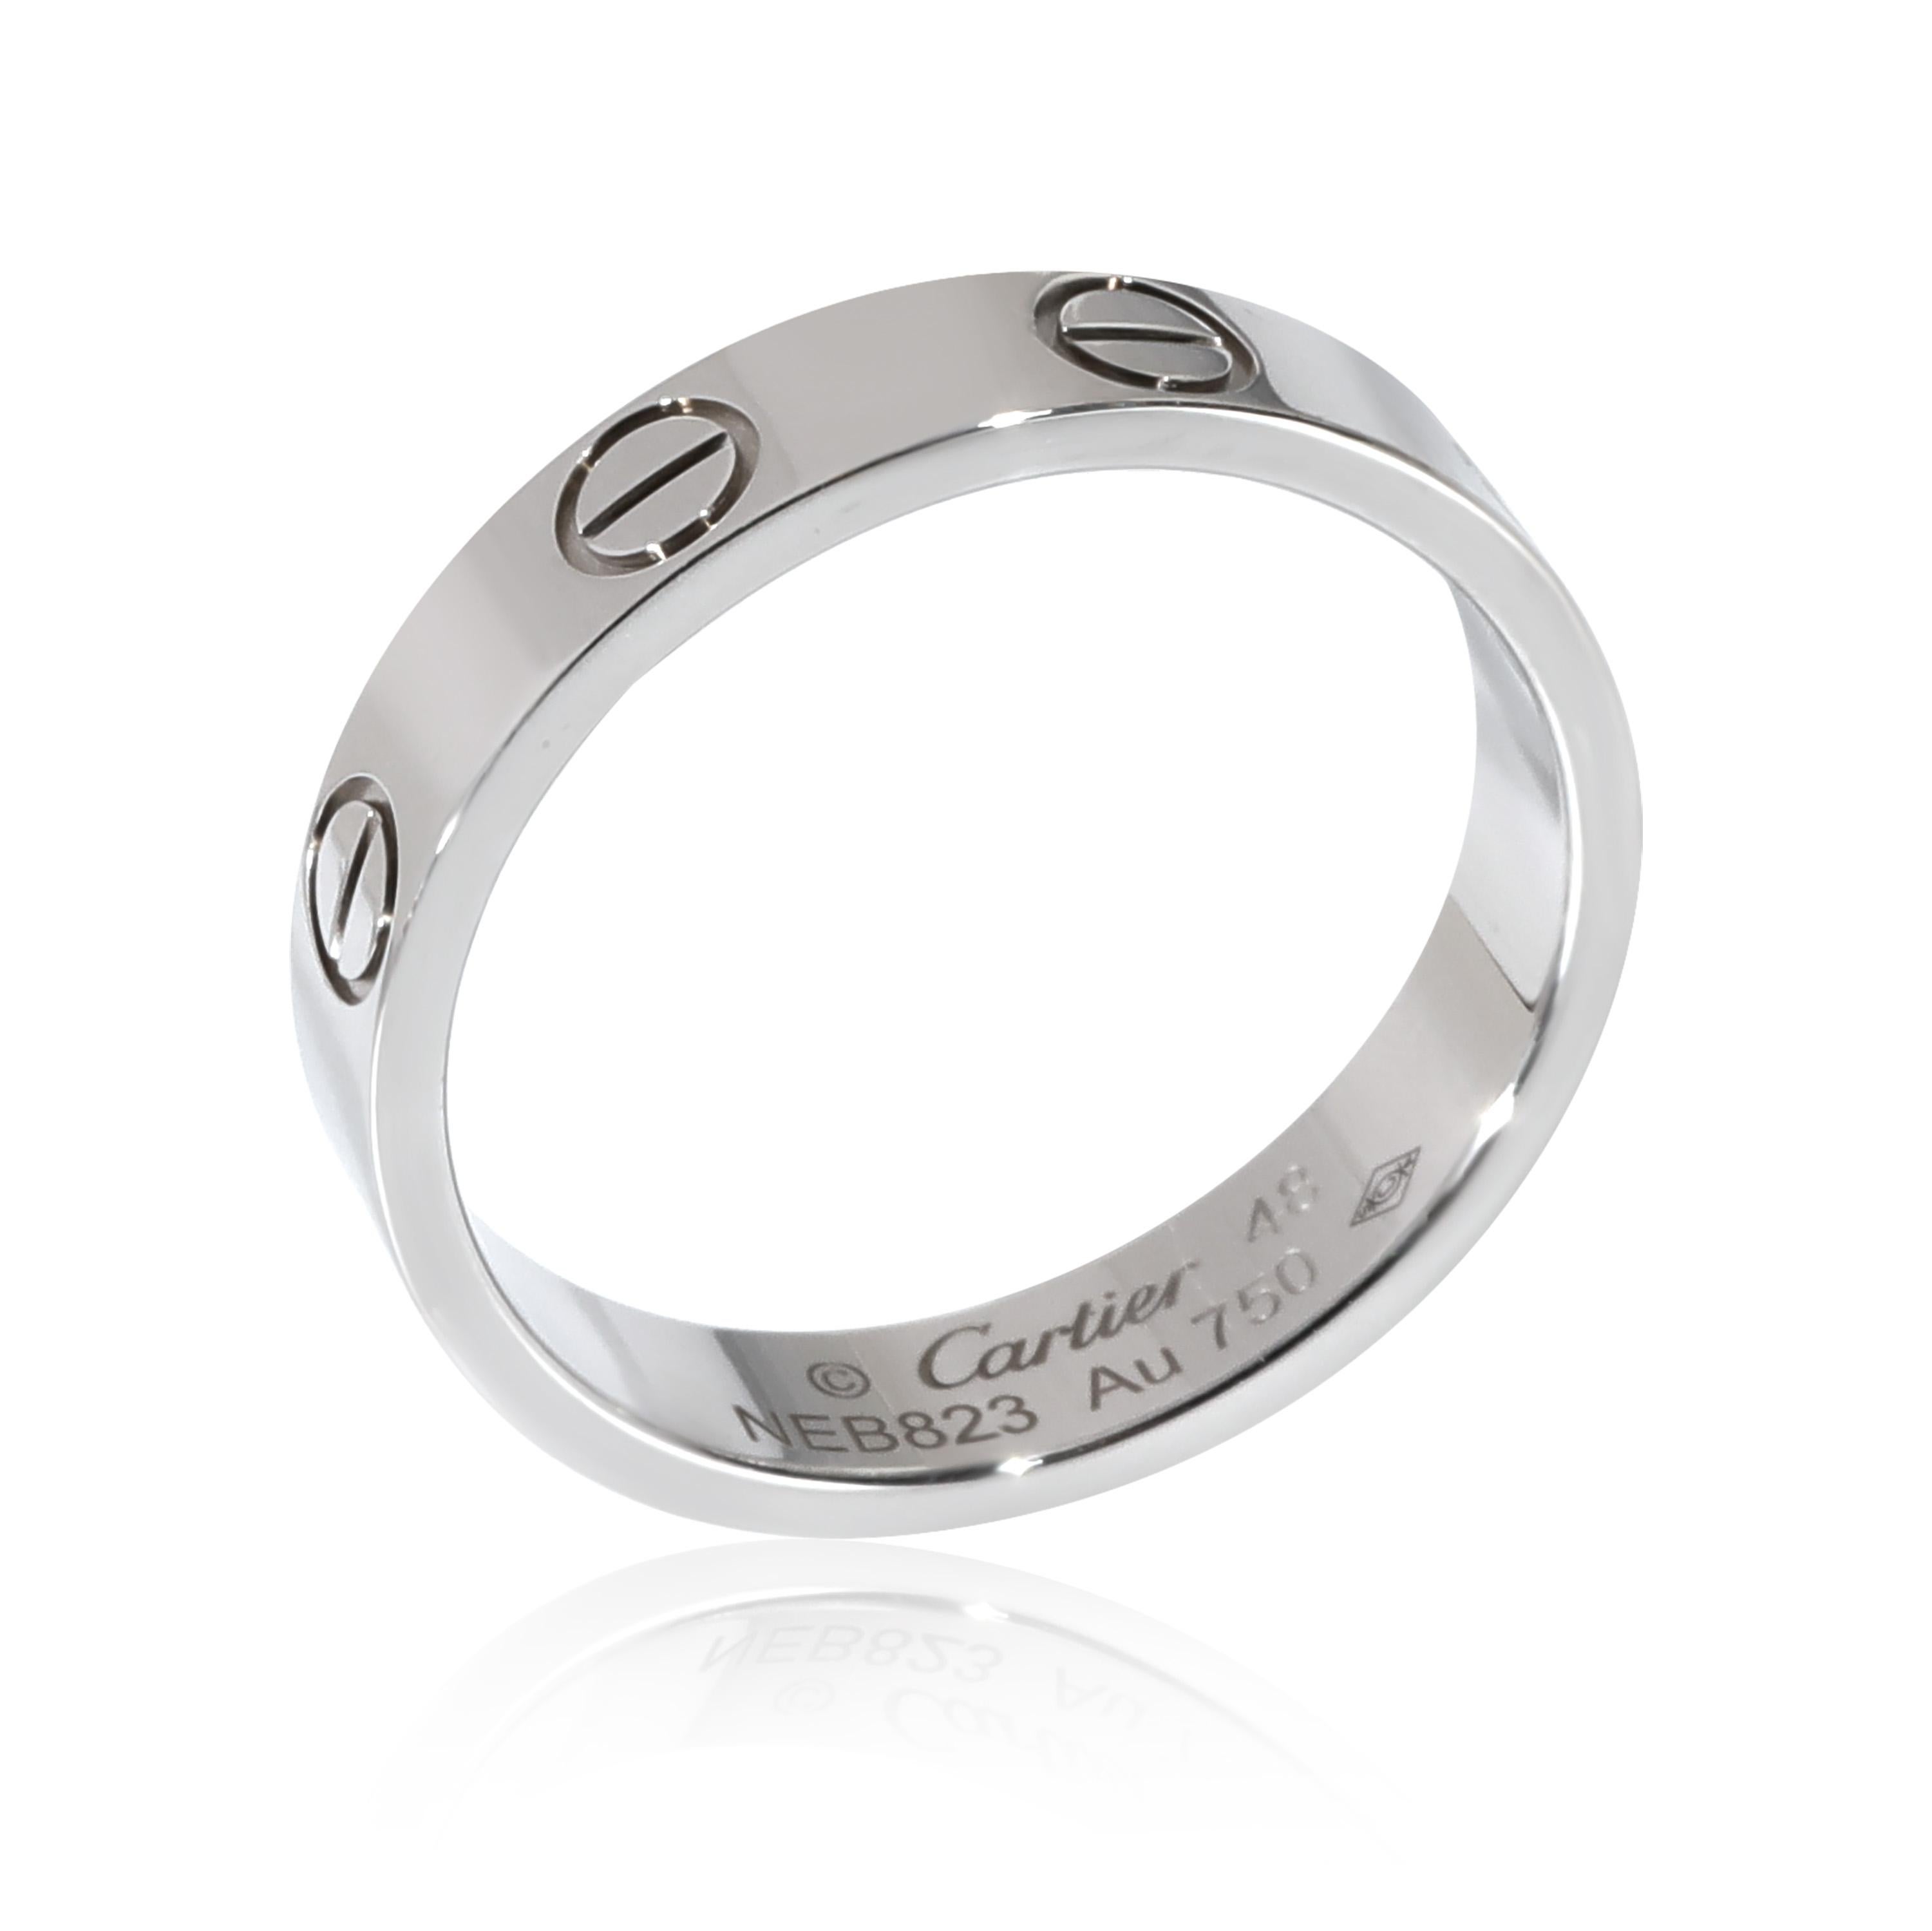 Cartier Love Wedding Band in 18k White Gold

PRIMARY DETAILS
SKU: 130913
Listing Title: Cartier Love Wedding Band in 18k White Gold
Condition Description: Cartier's Love collection is the epitome of iconic, from the recognizable designs to the